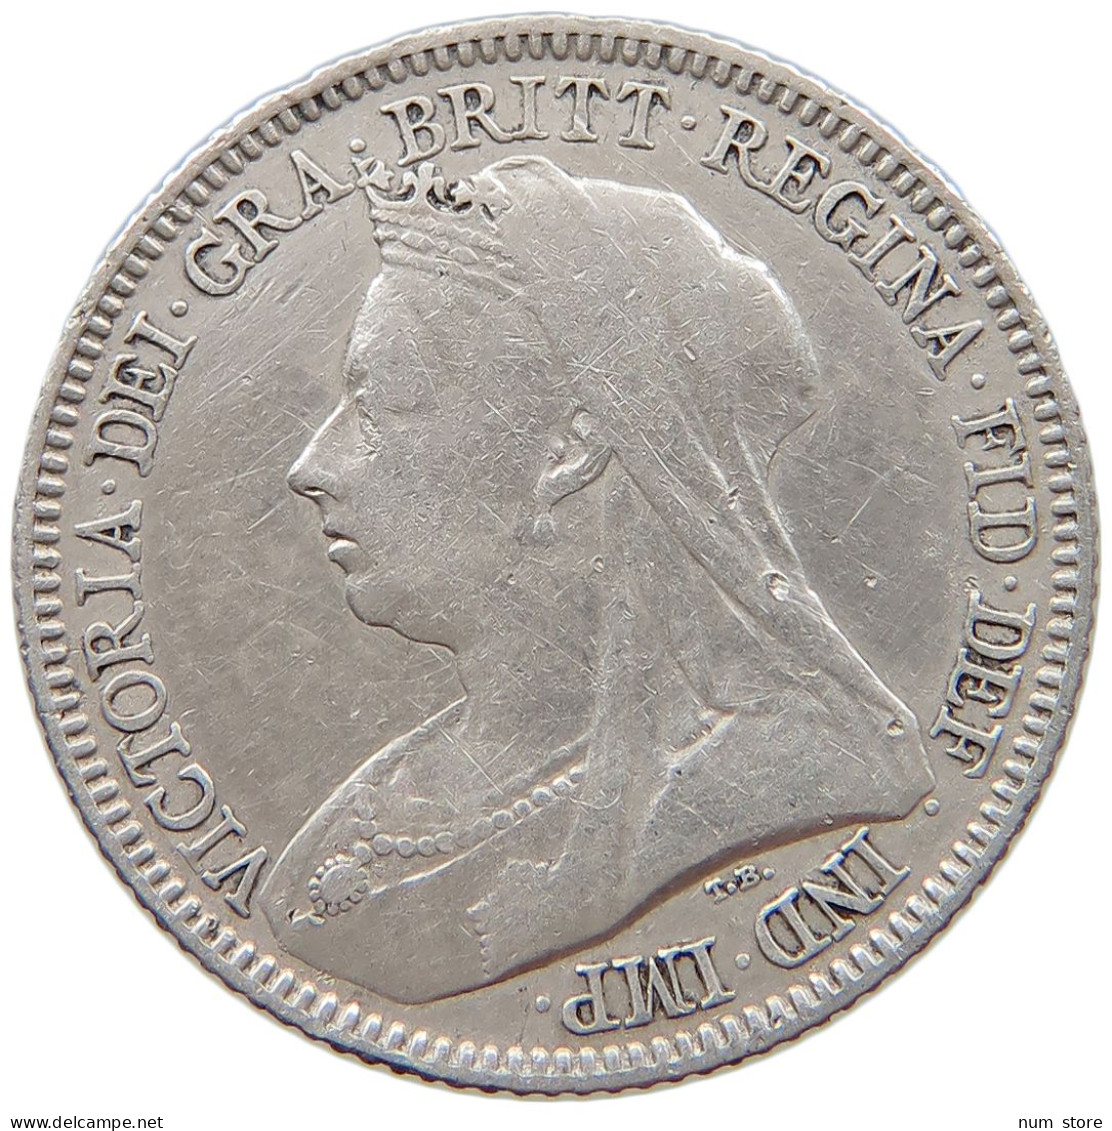 GREAT BRITAIN SIXPENCE 1893 Victoria 1837-1901 #t148 0641 - H. 6 Pence